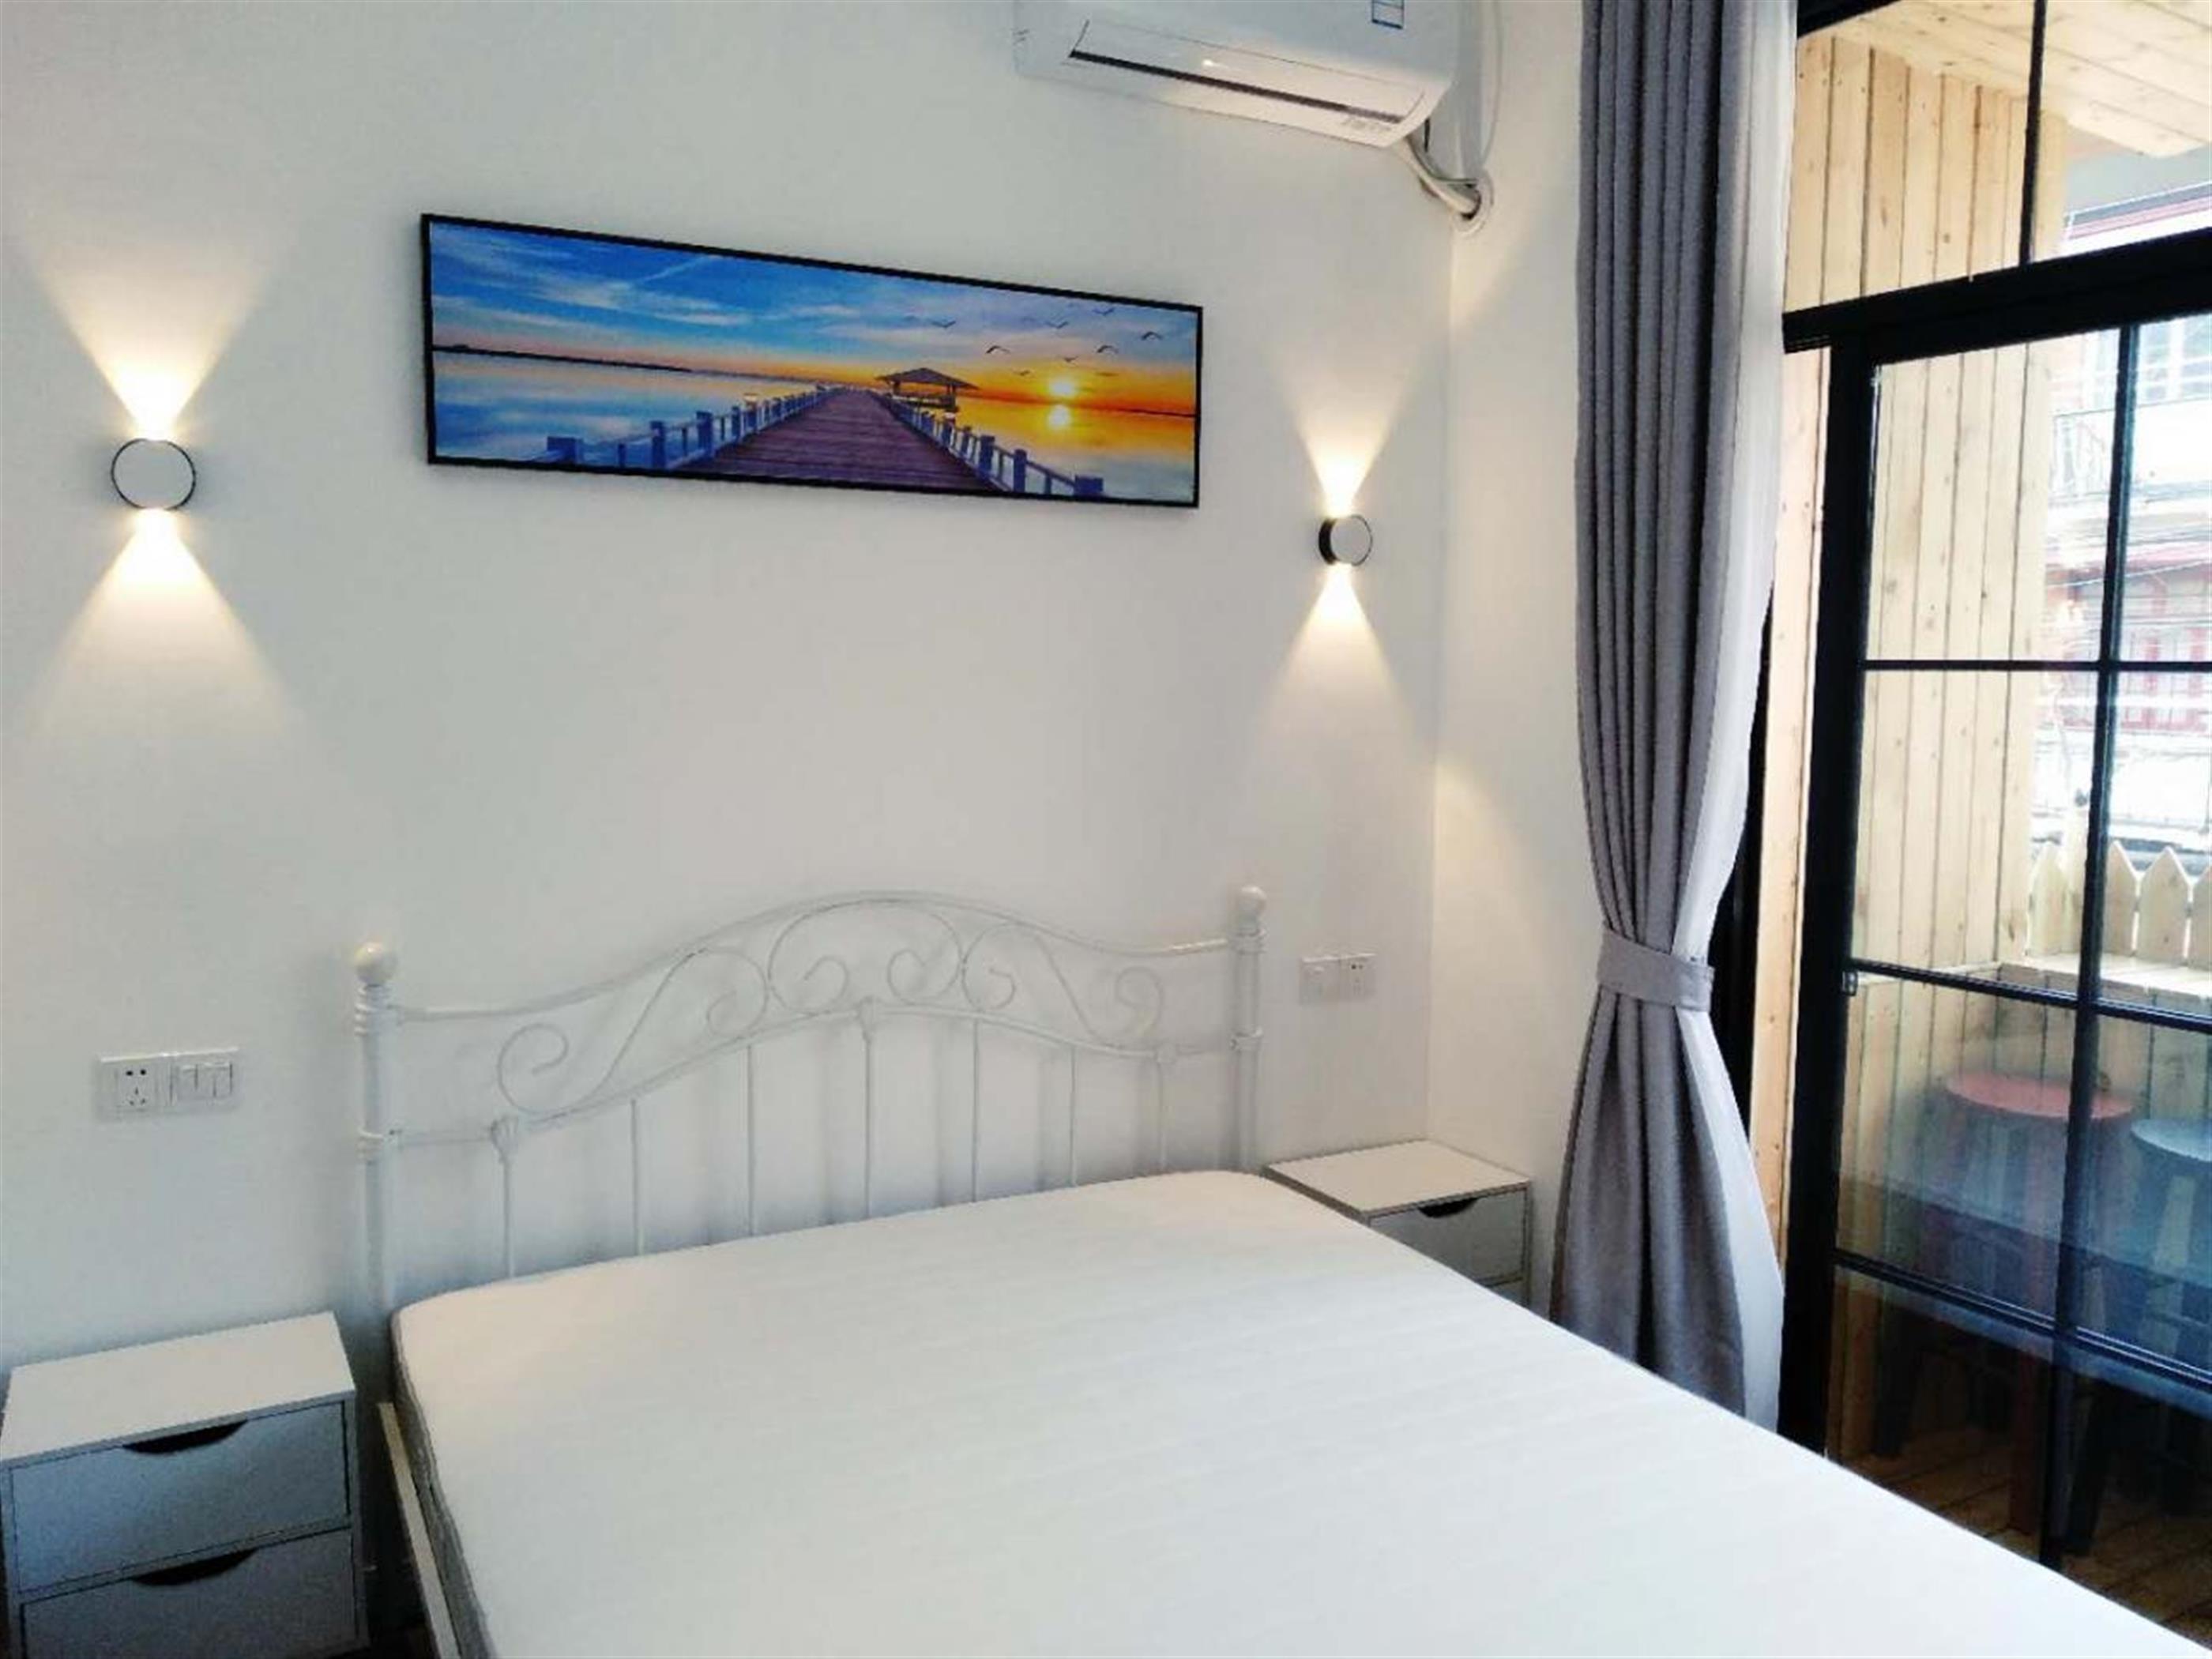 new bed Renovated Cozy Affordable FFC 1BR Apt nr Jiashan Mkt LN9/12 for Rent in Shanghai